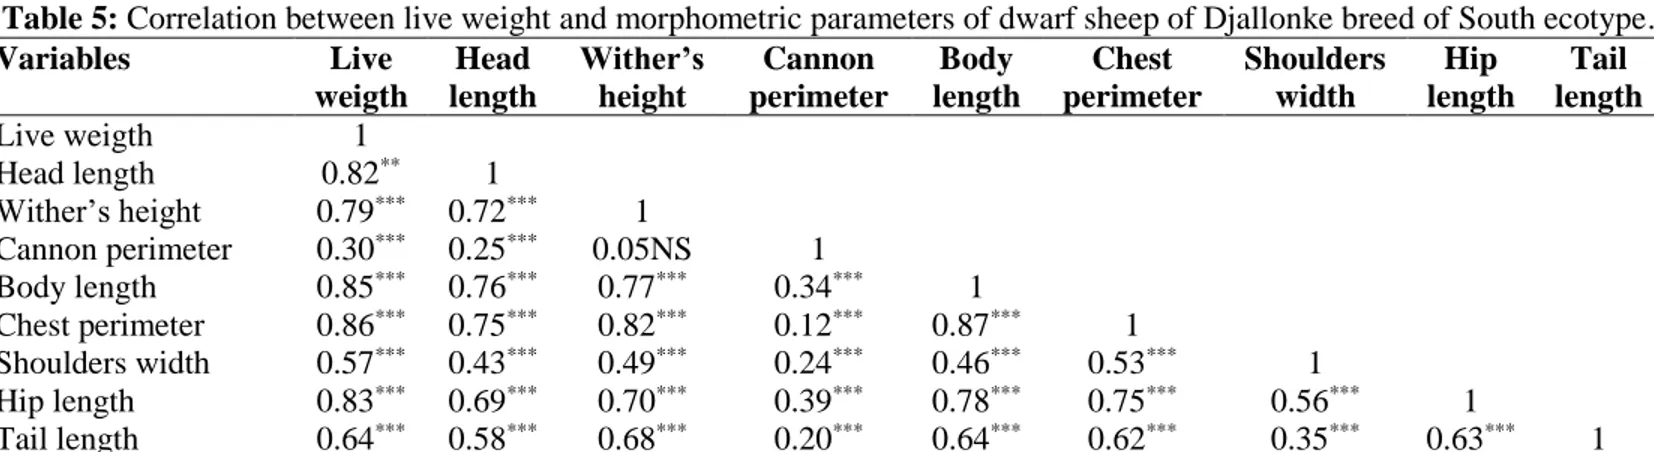 Table 5: Correlation between live weight and morphometric parameters of dwarf sheep of Djallonke breed of South ecotype